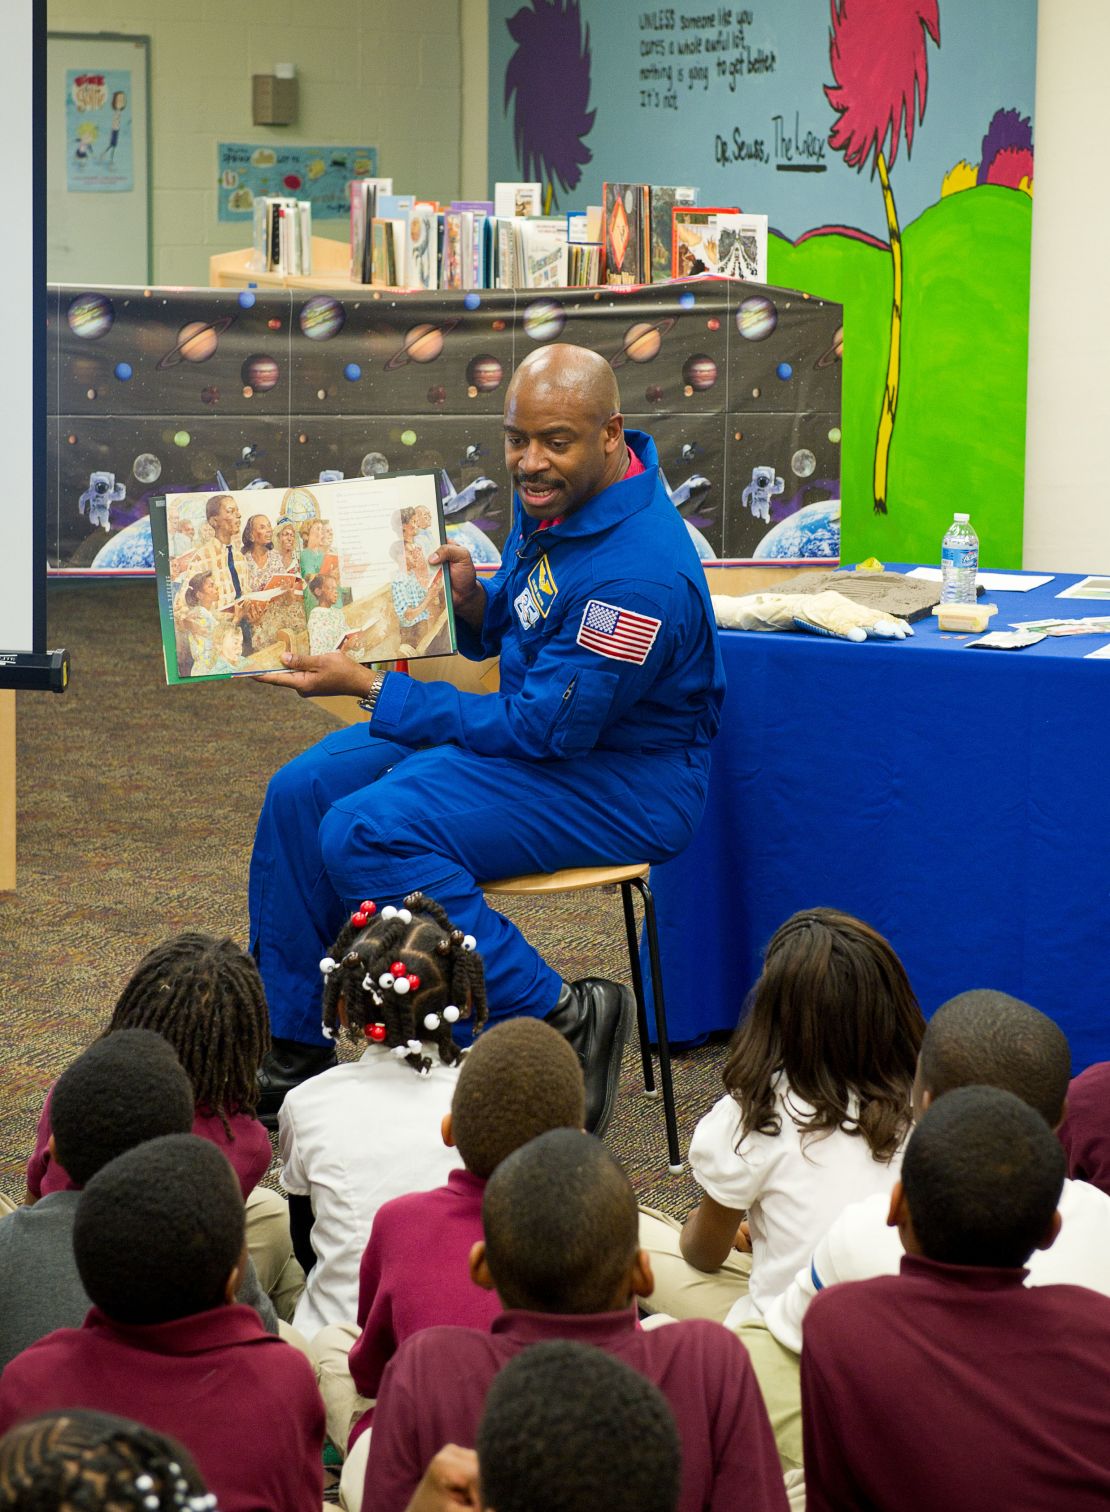 Melvin read to first and third grade students from the book "The Moon Over Star" at Ferebee-Hope Elementary School on Tuesday, Feb. 8, 2011, in honor of Black History Month, and to highlight the importance of reading.